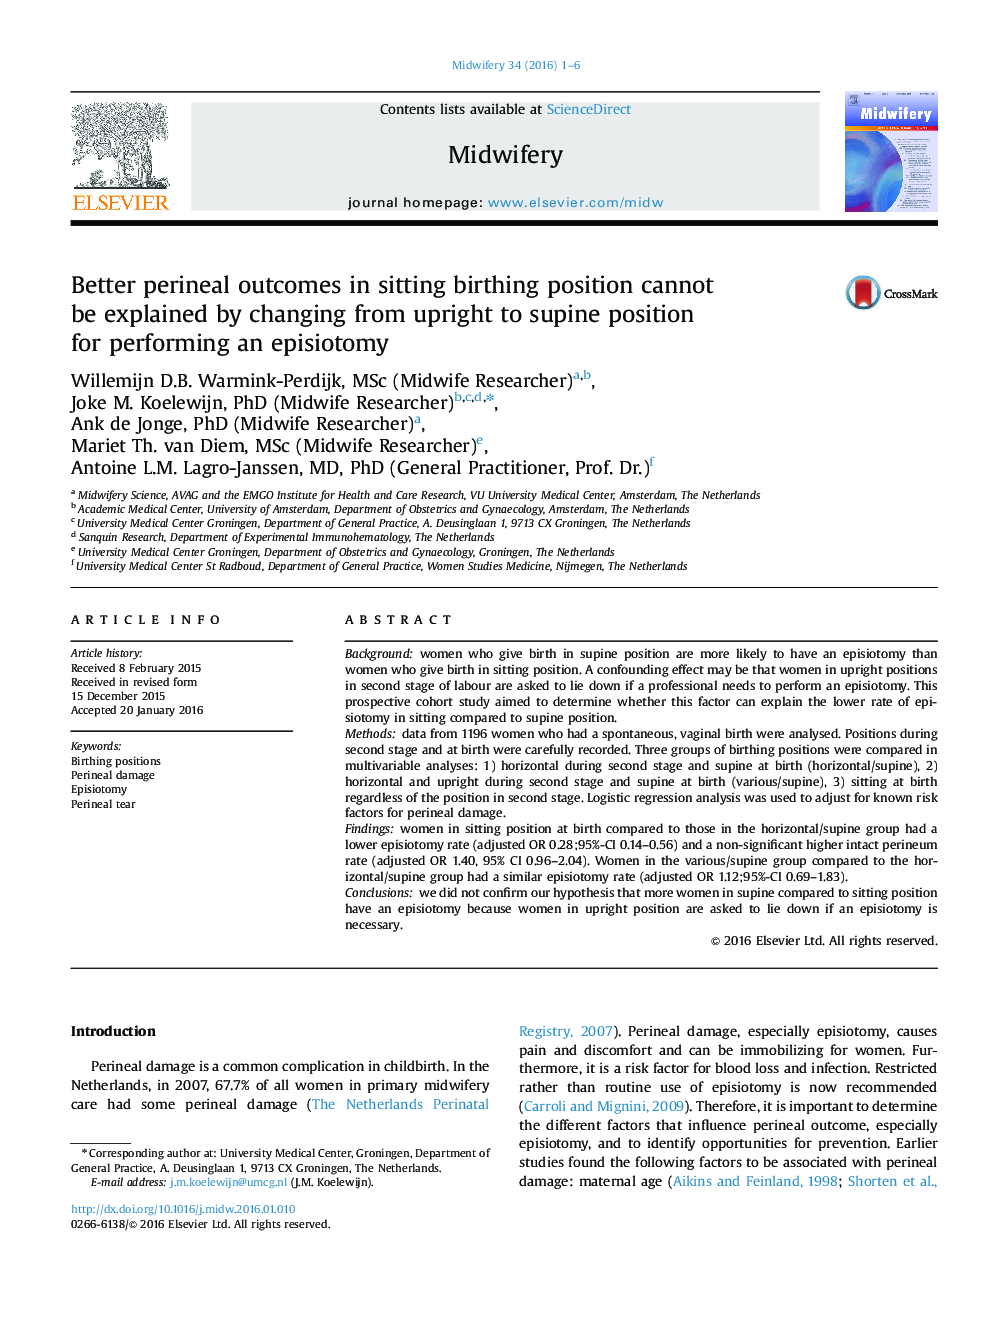 Better perineal outcomes in sitting birthing position cannot be explained by changing from upright to supine position for performing an episiotomy